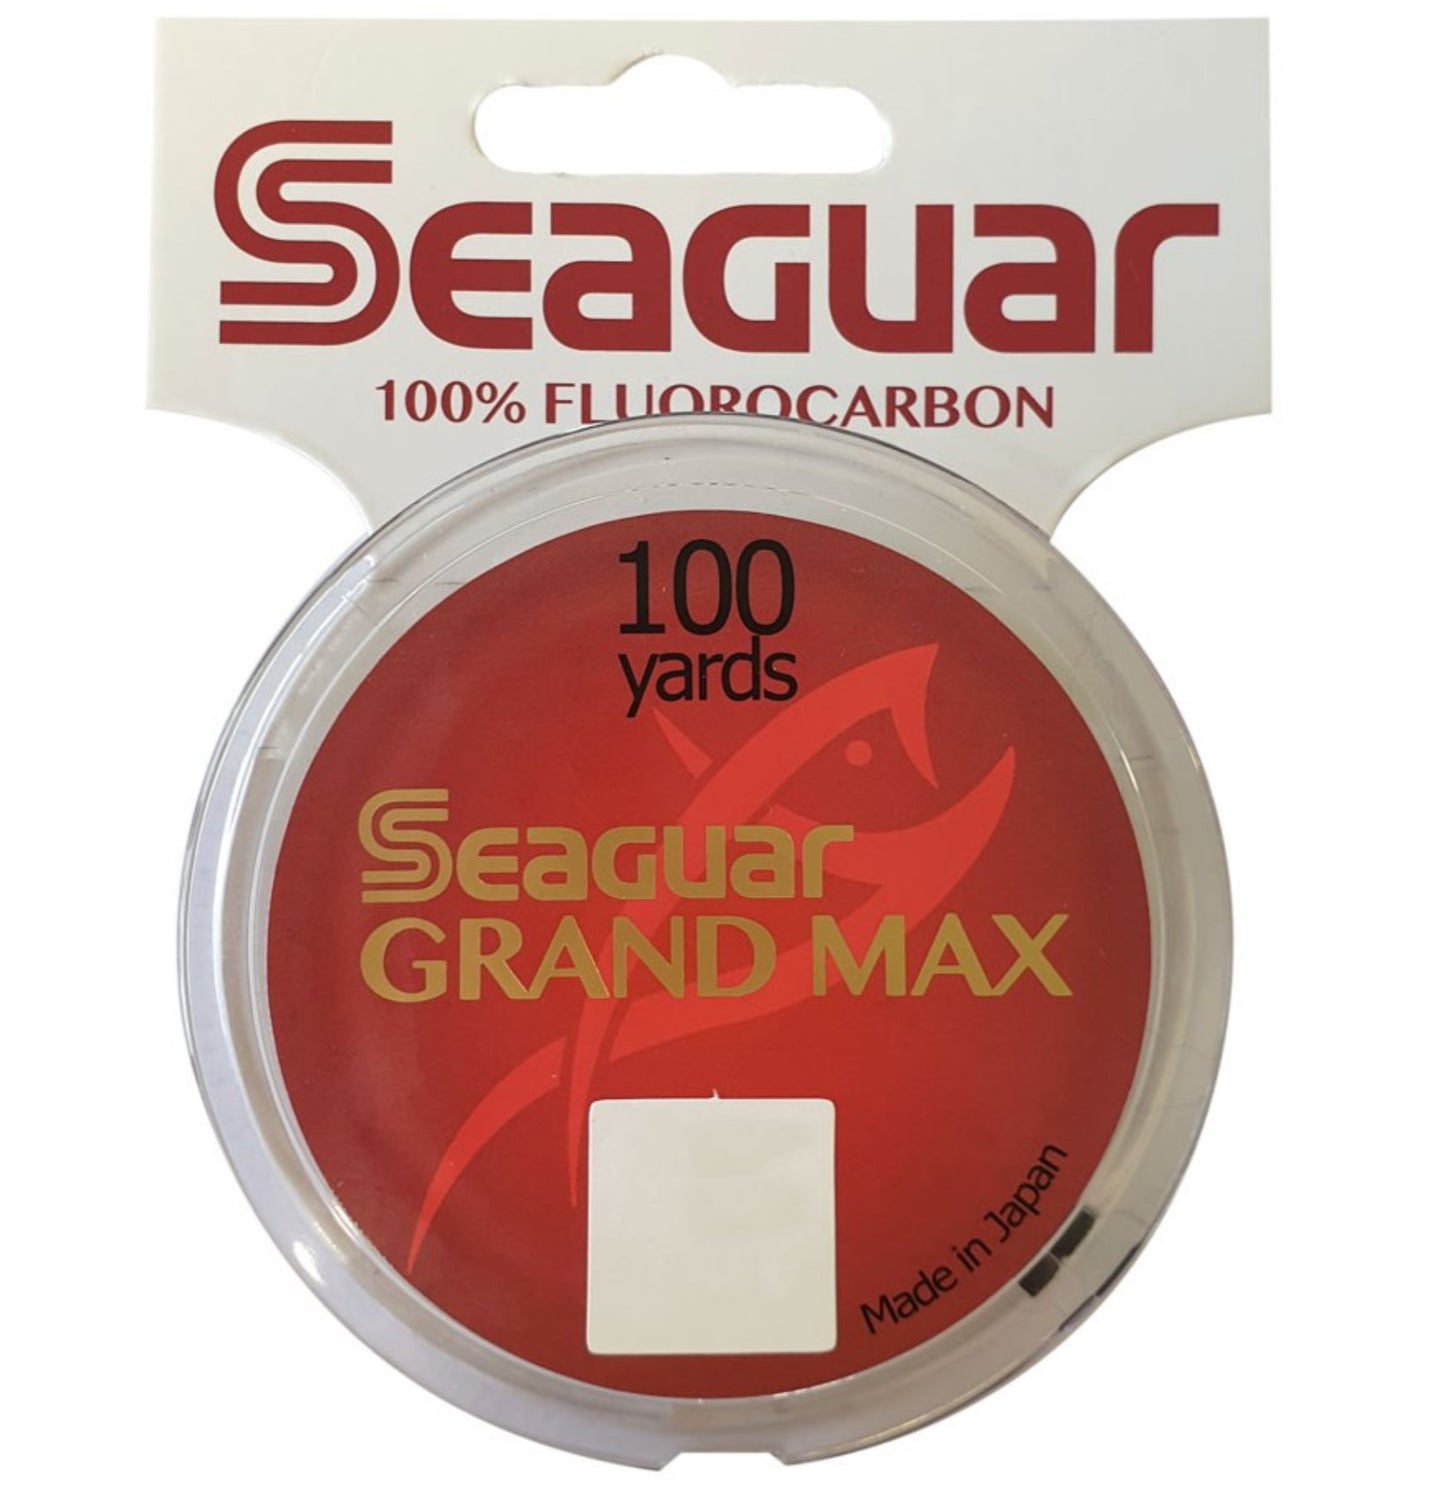 Seaguar Grand Max Fluorocarbon Tippet 100yds